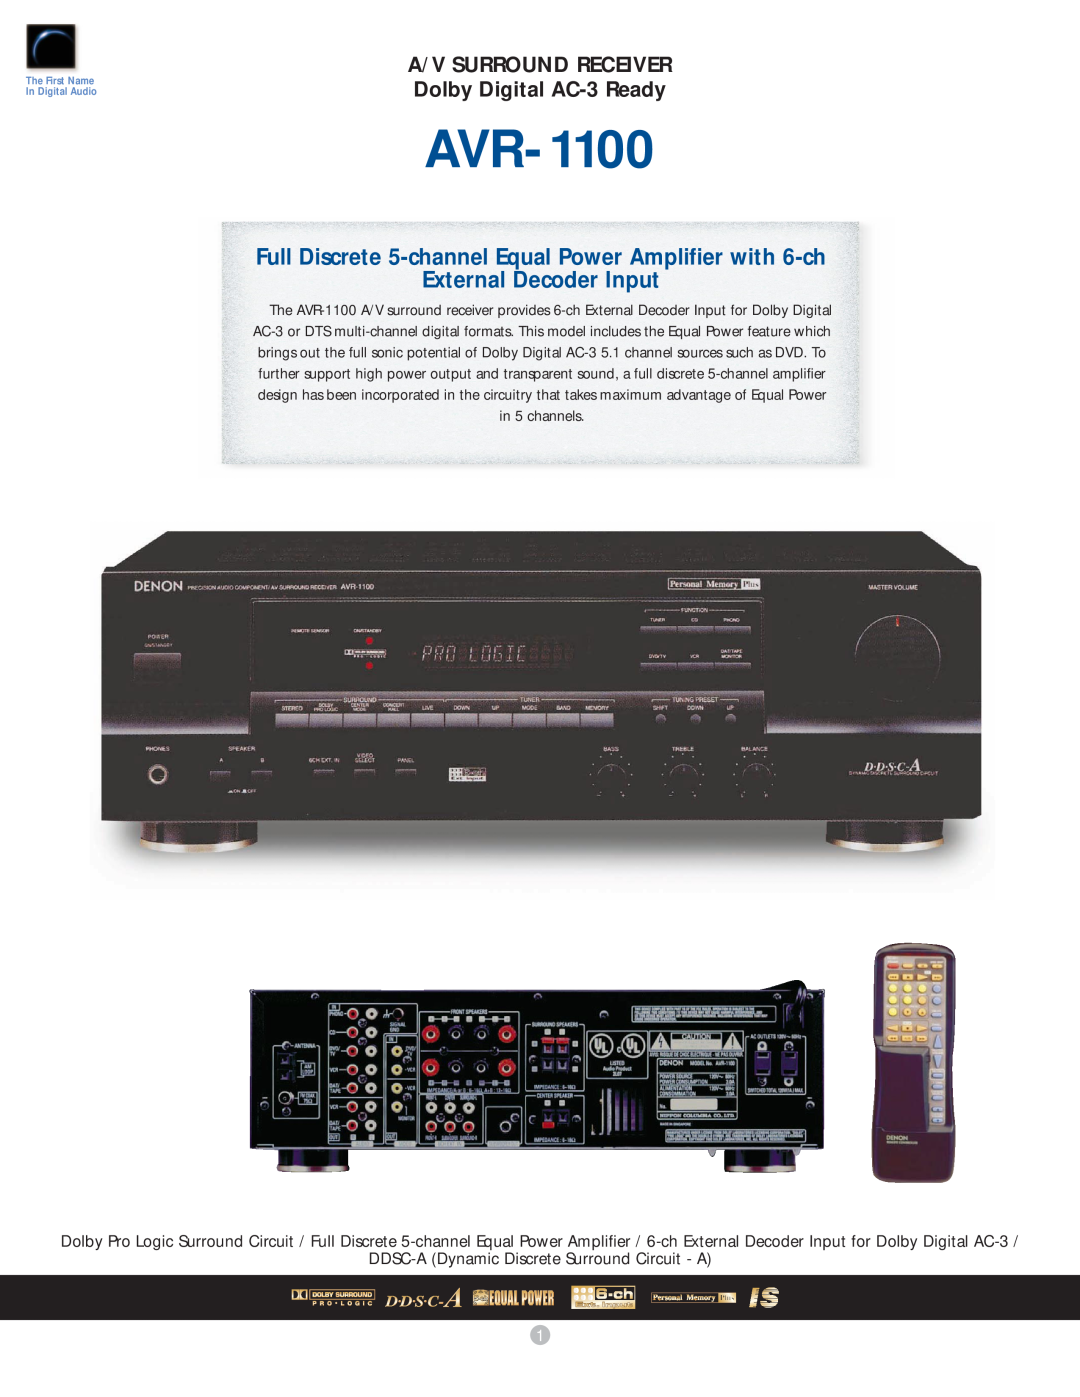 Denon AVR-1100 manual External Decoder Input, A/V SURROUND RECEIVER Dolby Digital AC-3Ready, in 5 channels 